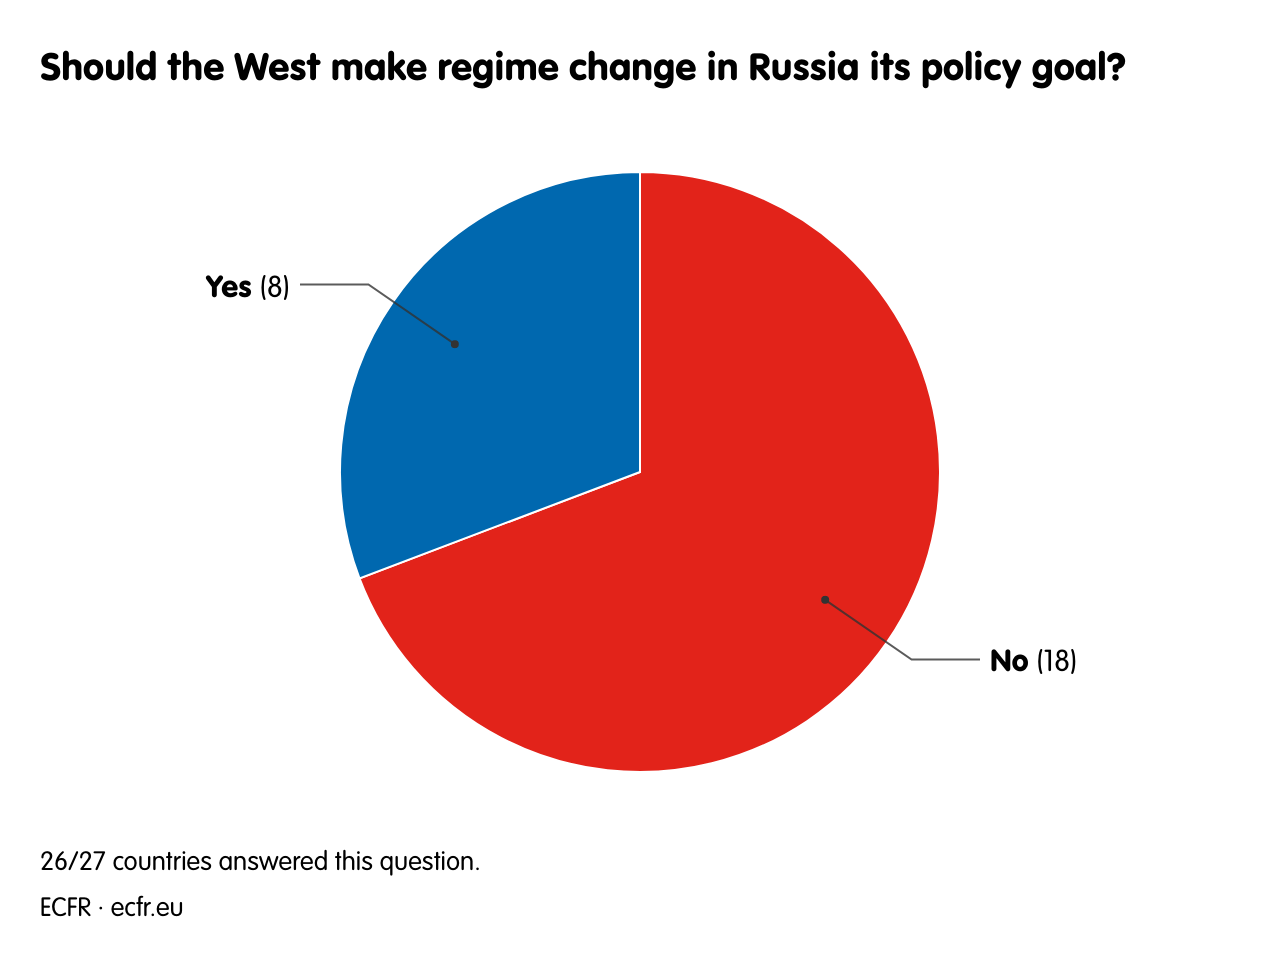 Should the West make regime change in Russia its policy goal?